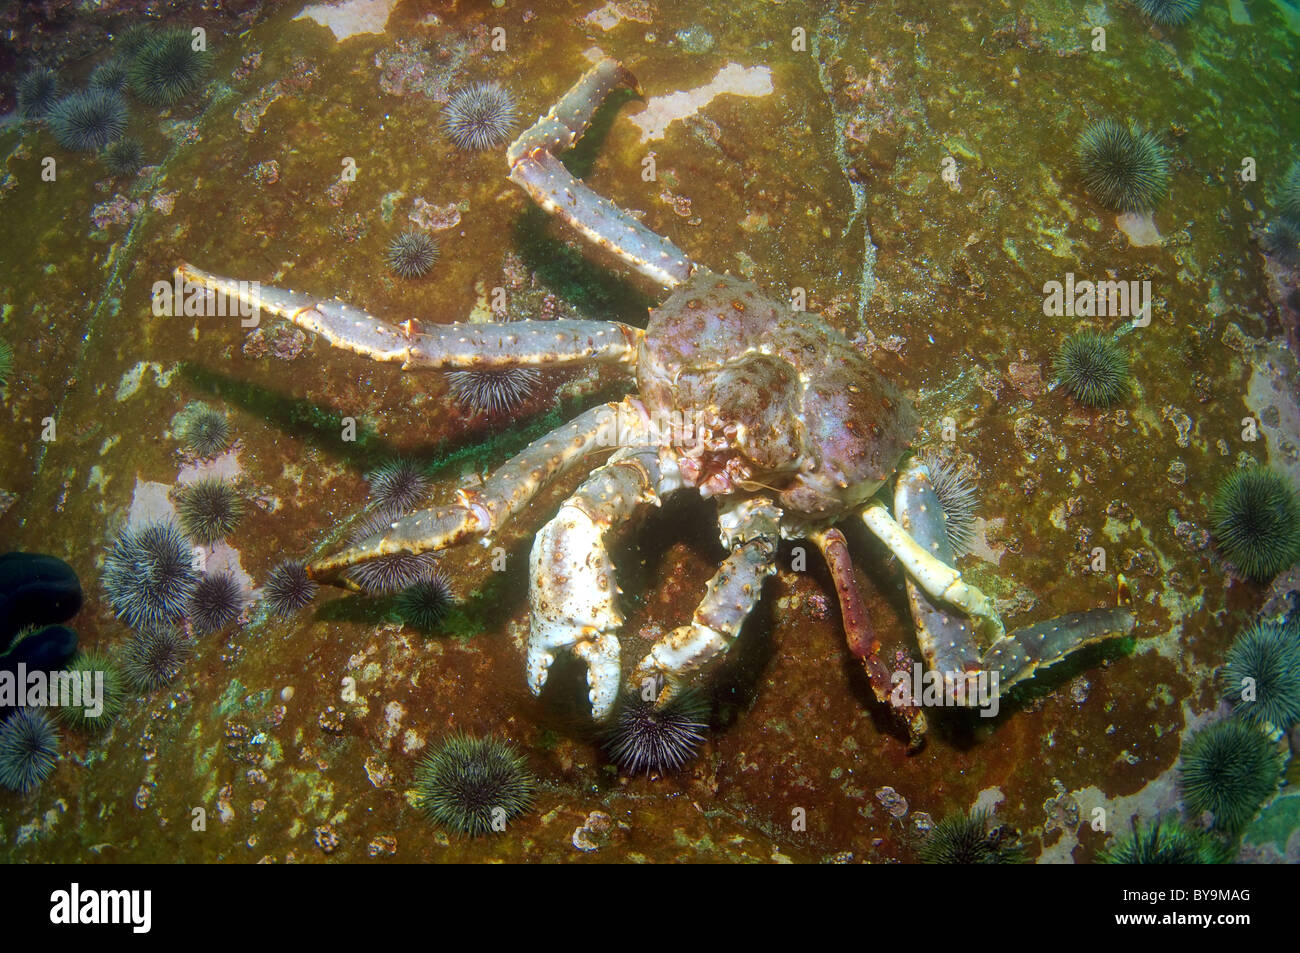 Krabben Sie-cantschaticus, Red King Crab (Paralithodes cantschaticus) Stockfoto